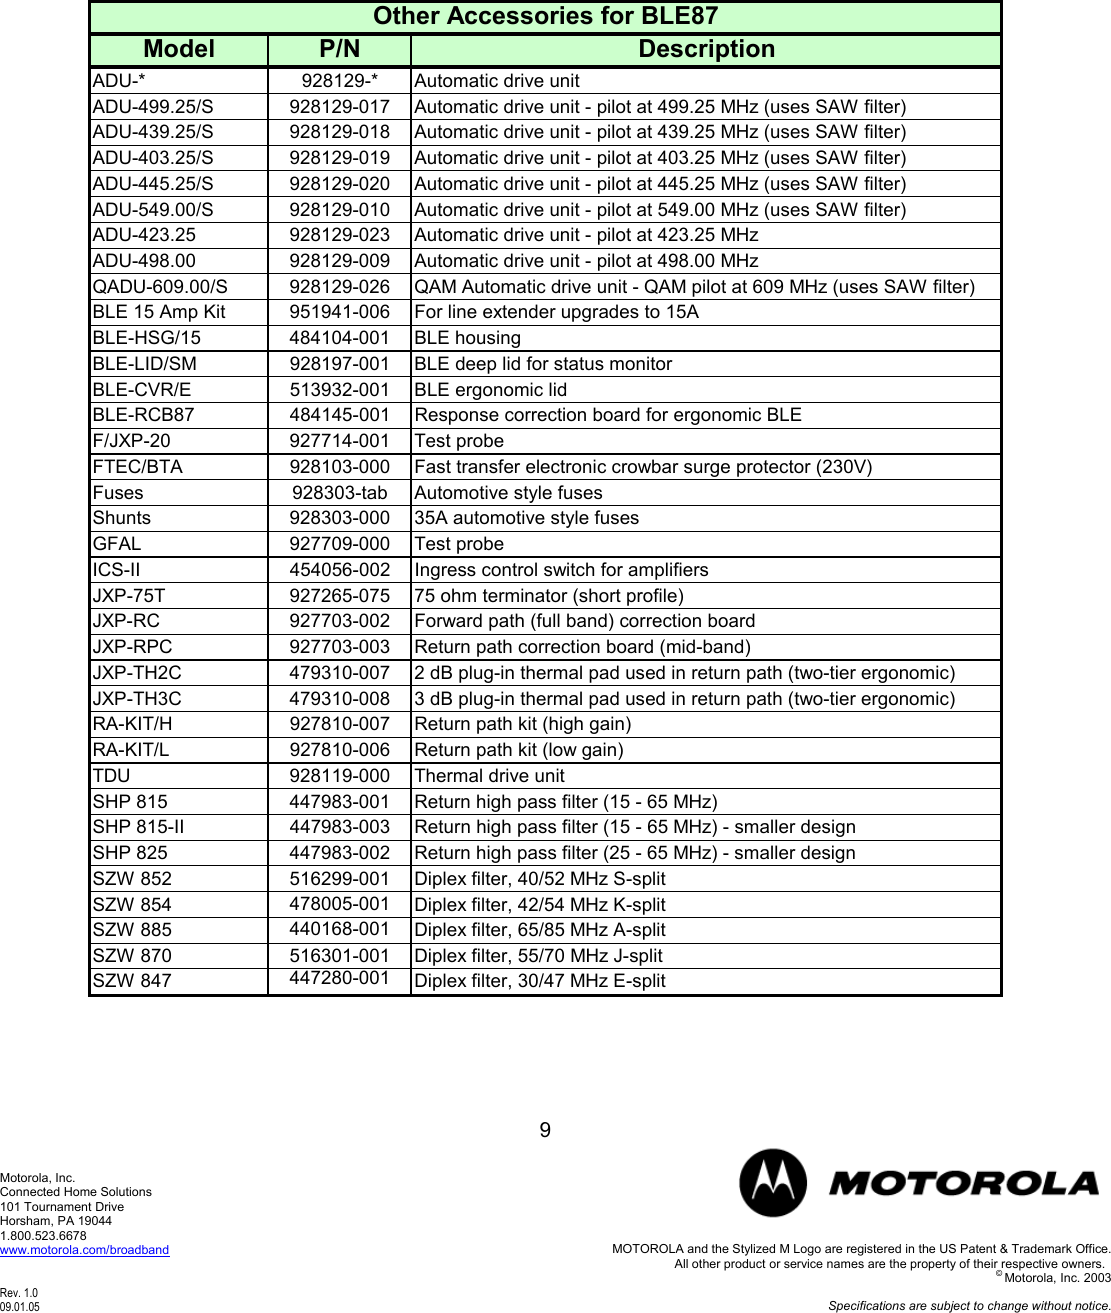 Page 9 of 9 - Motorola Motorola-Ble87-Users-Manual BLE_Catalog_Specifications_9-1-05